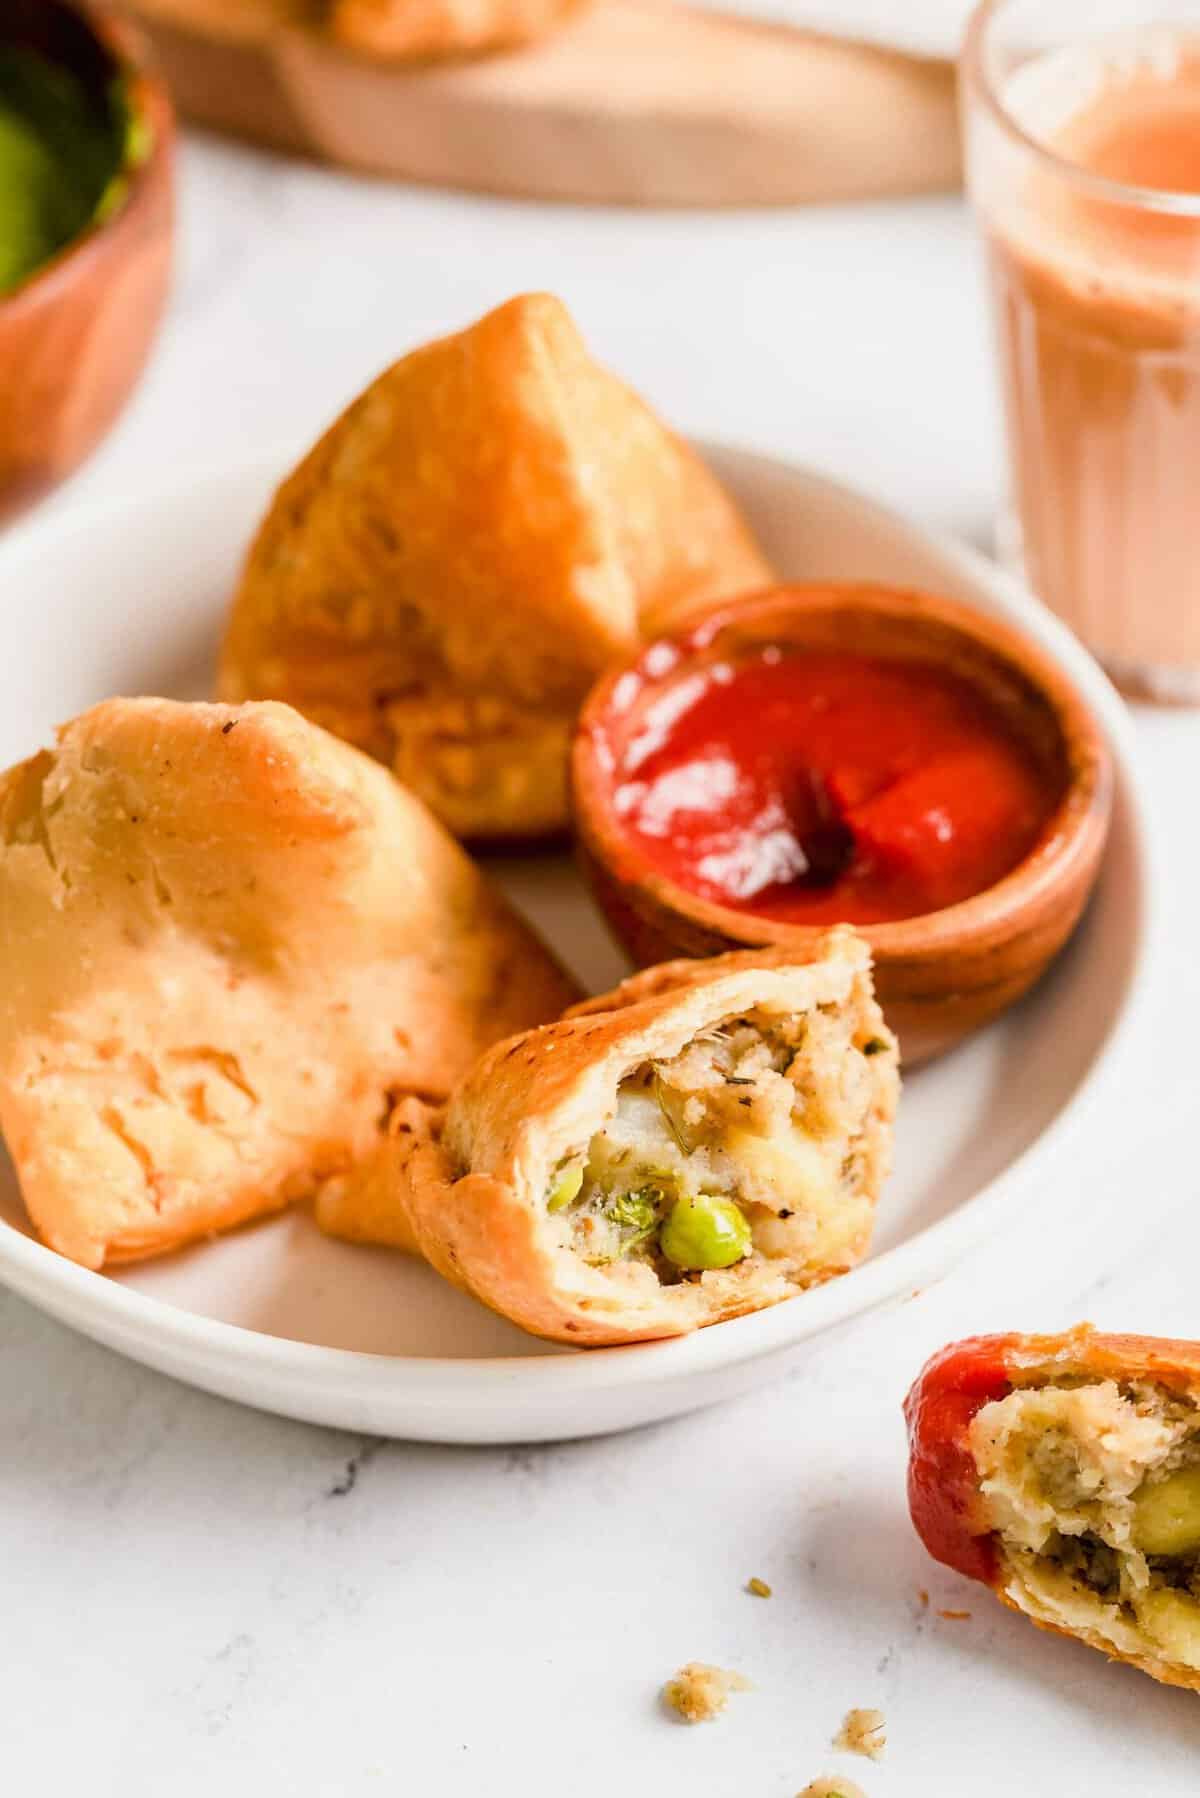 Samosas on plate with sauce, with one samosa cut open to show inside